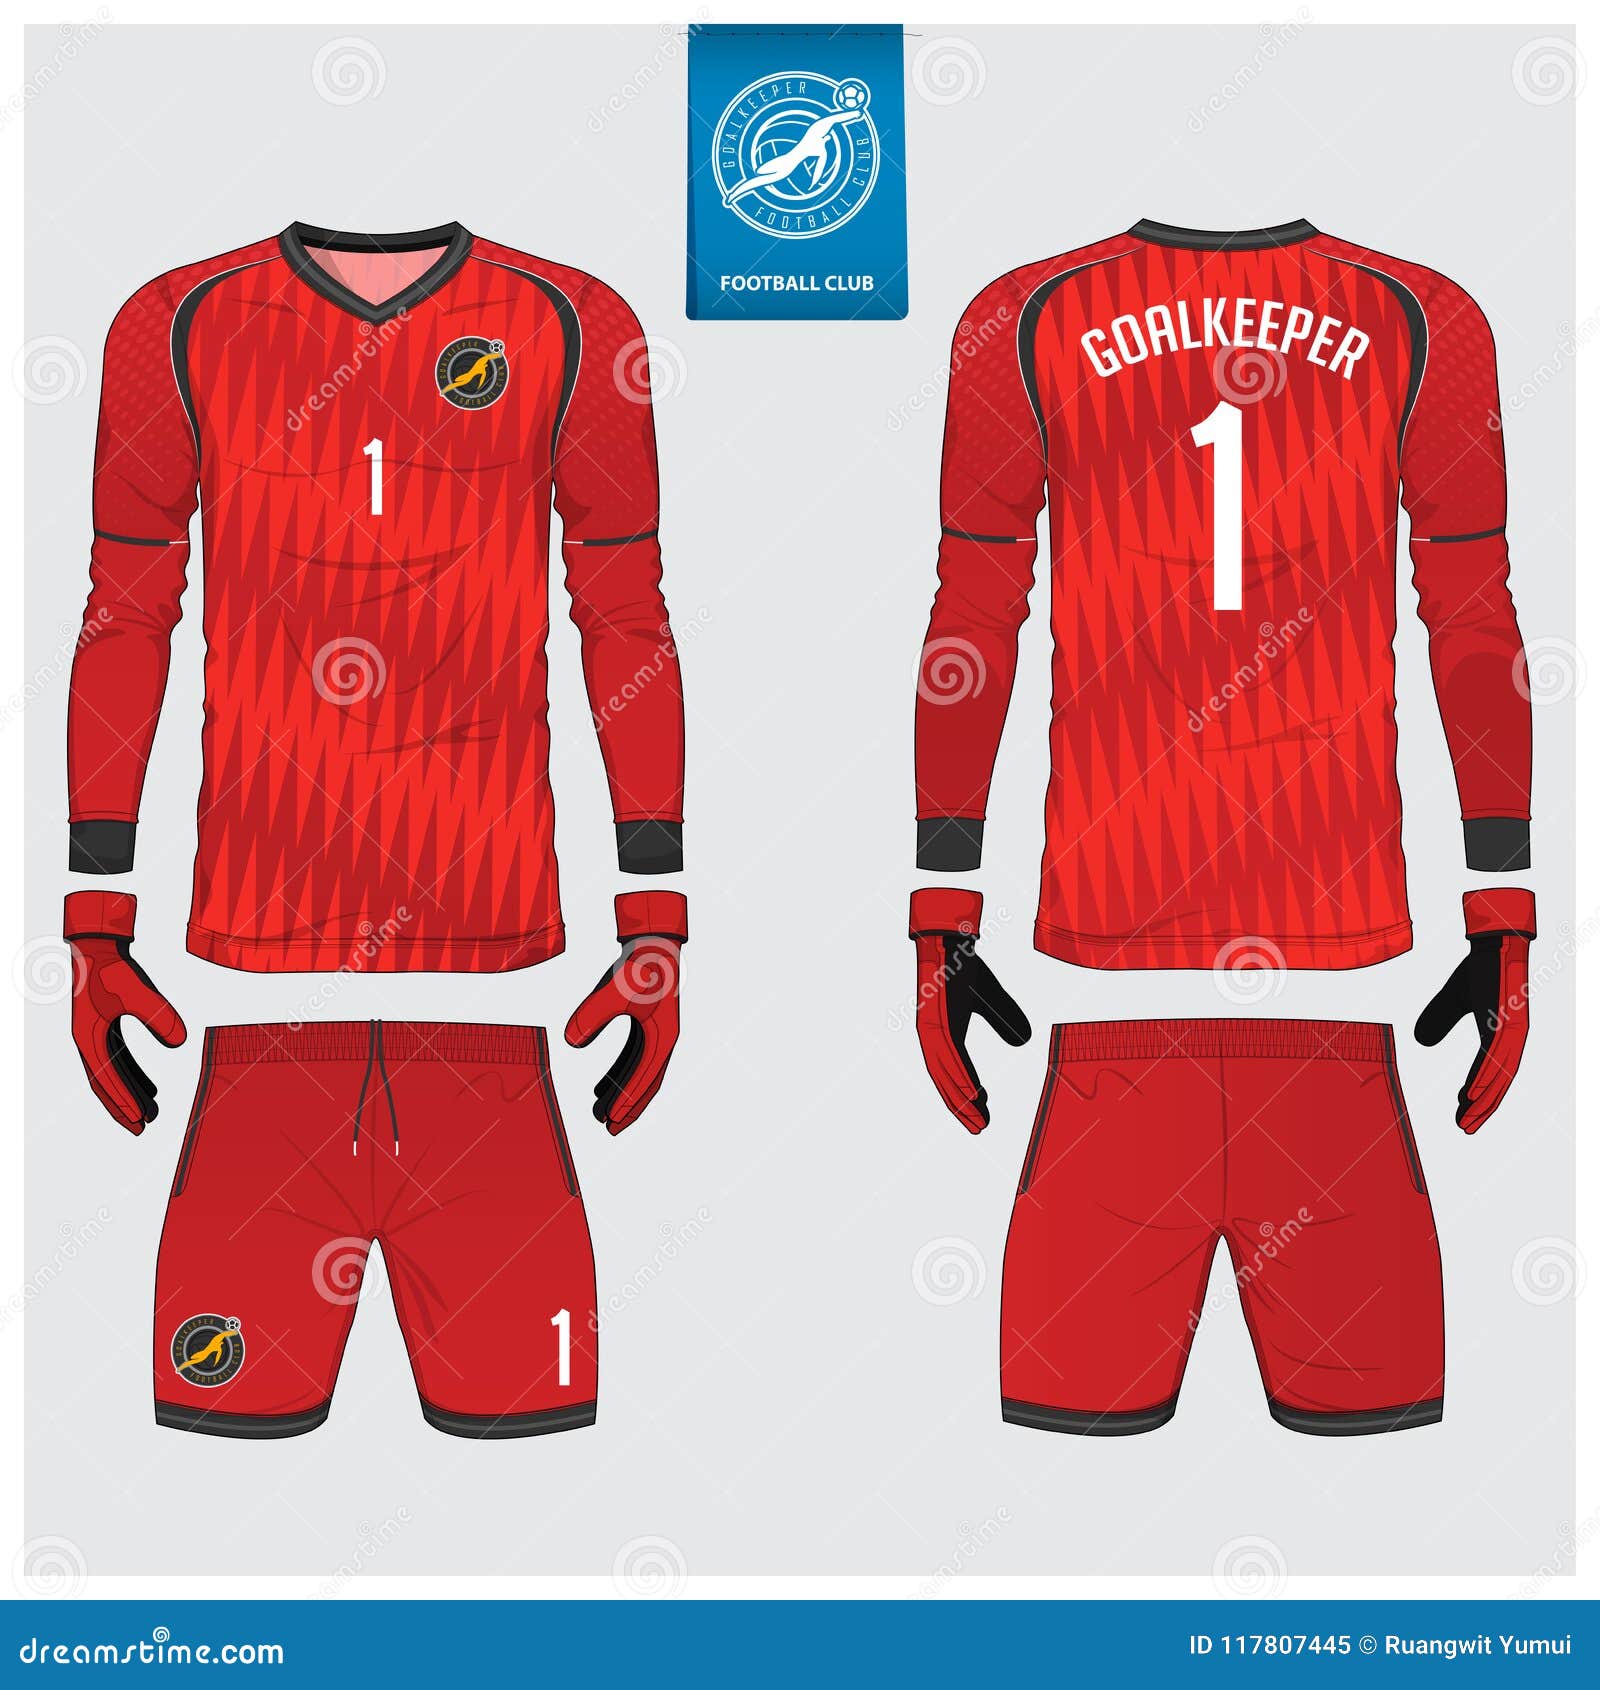 Goalkeeper jersey,t-shirt sport design template, Long sleeve soccer jersey  mockup for football club. uniform front and back view. Stock Vector